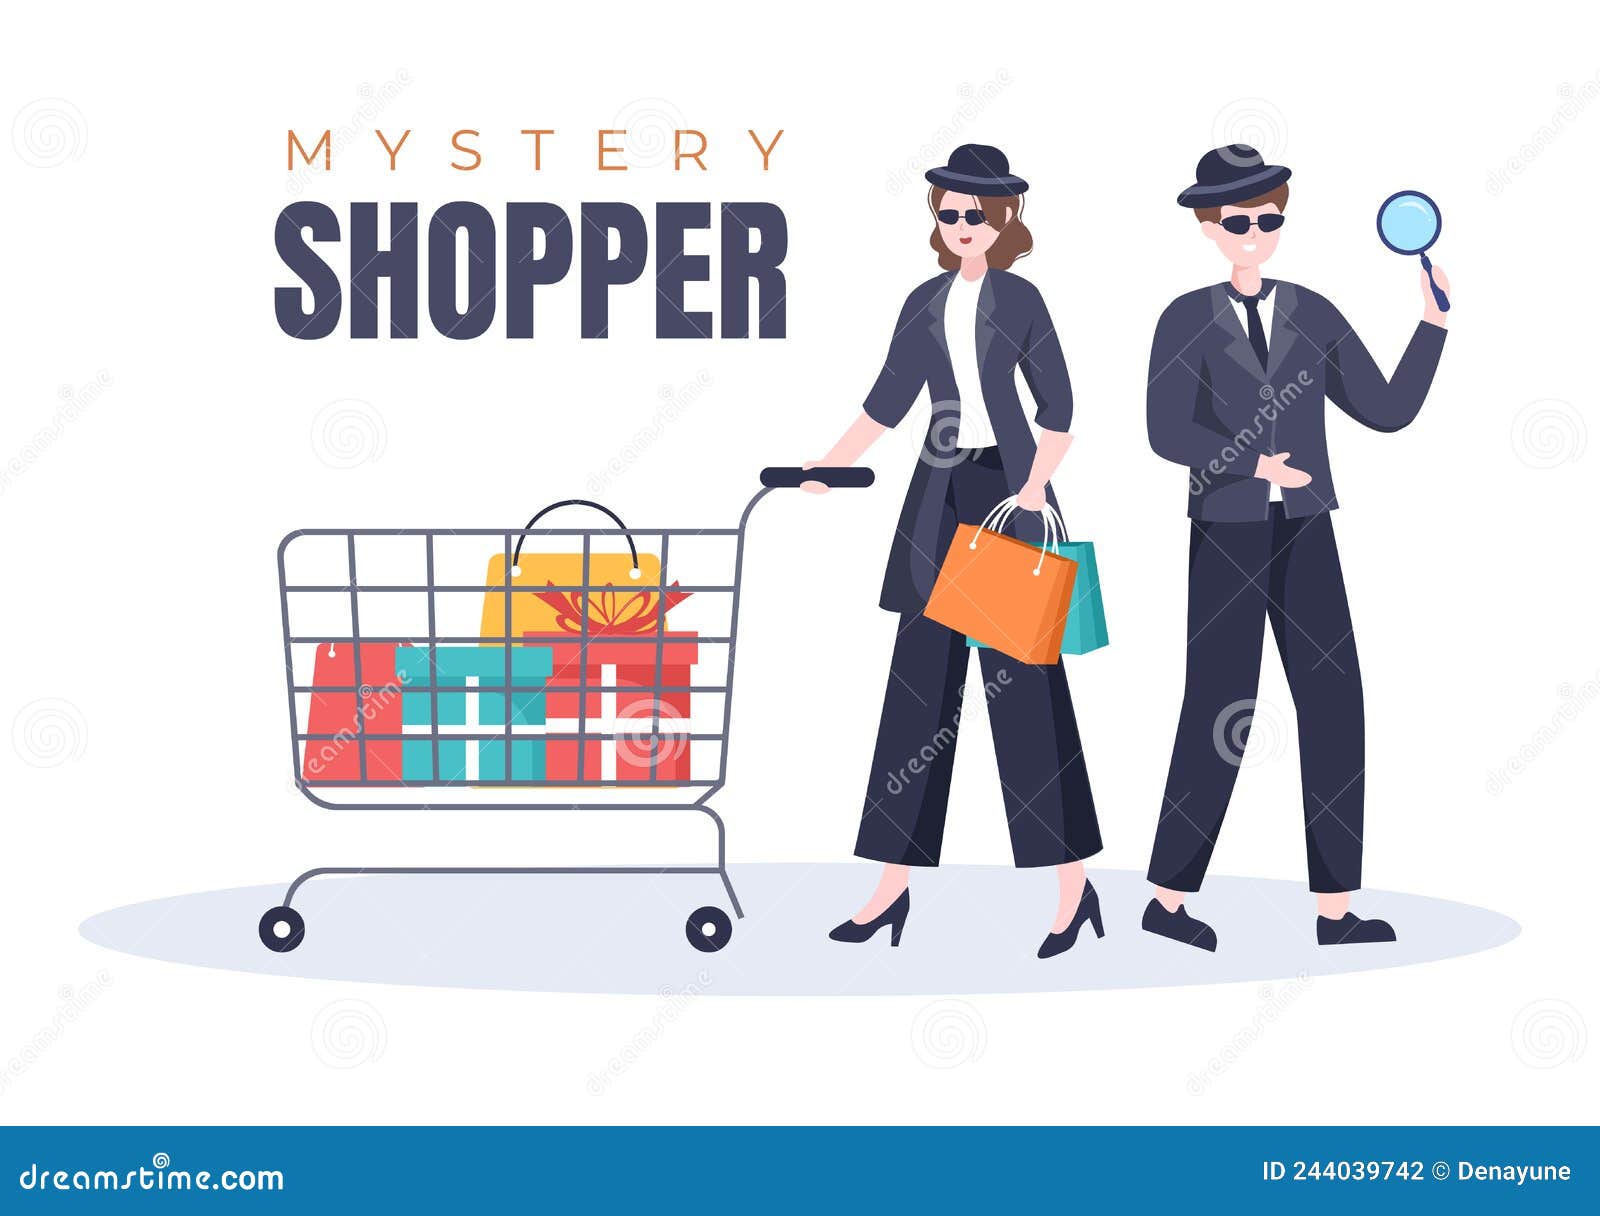 mystery shopper with bags in sunglasses, magnifier, spy coats and hats in flat cartoon style 